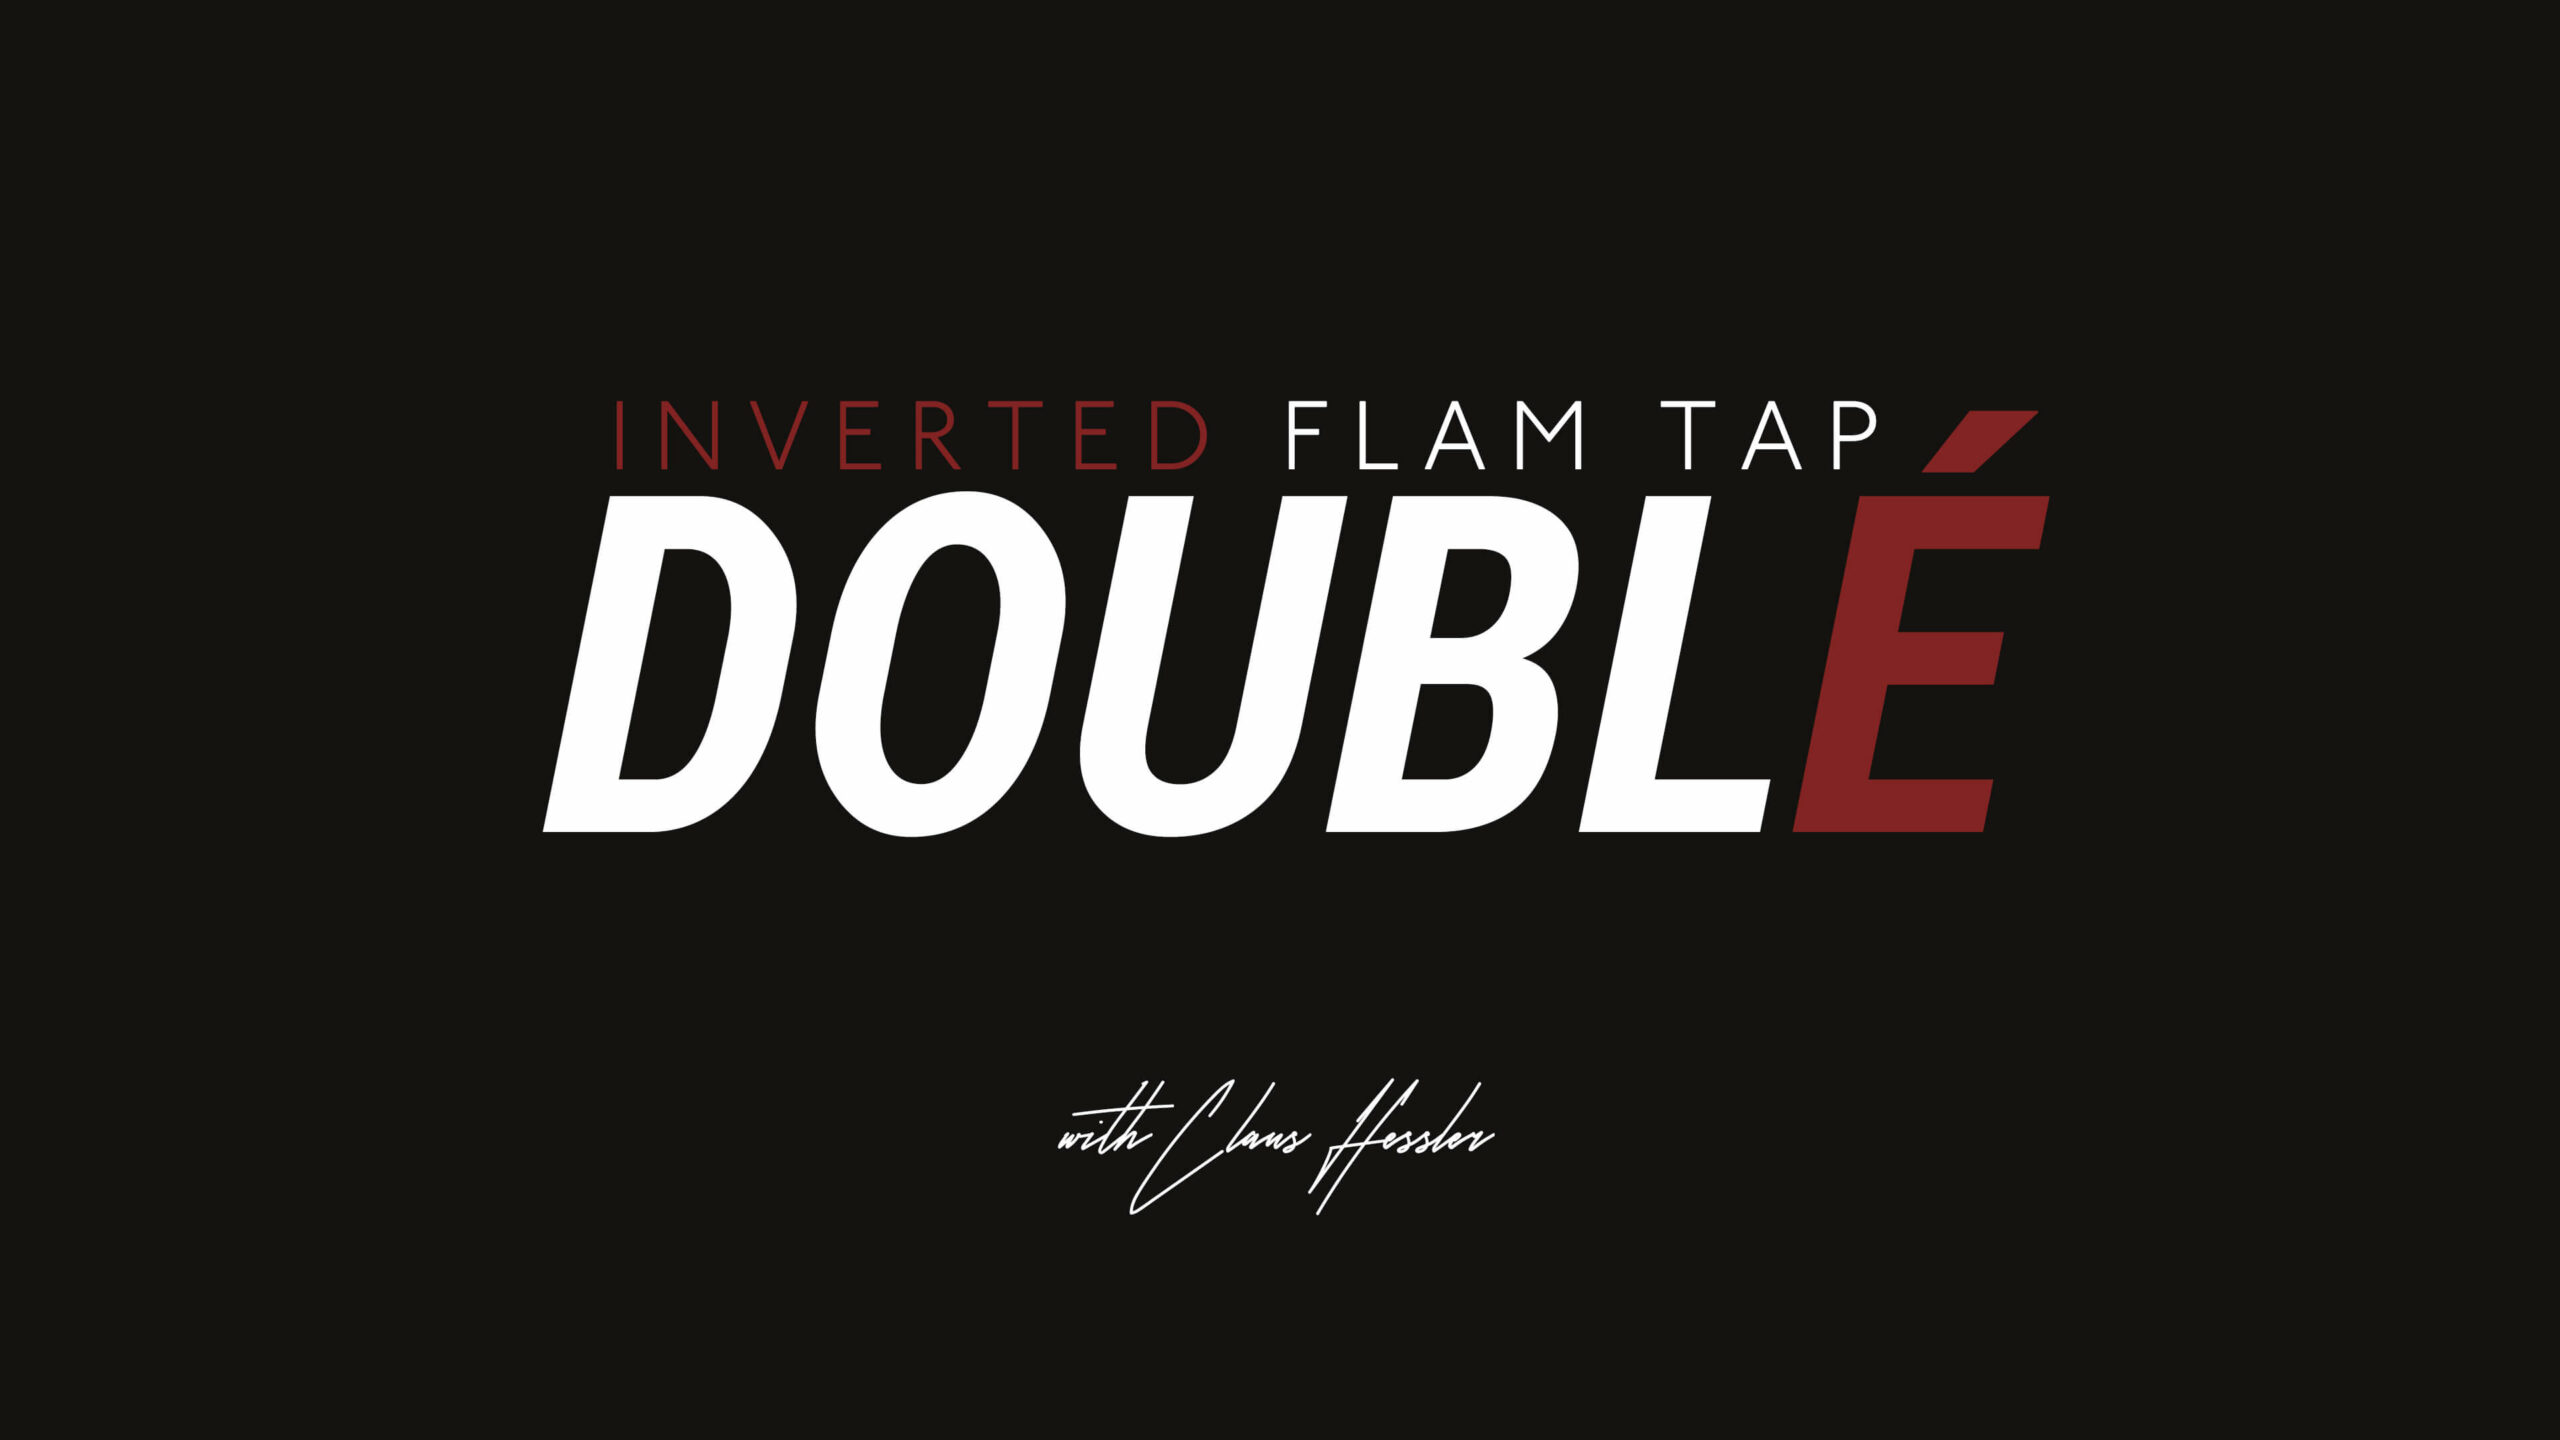 chapter 2 lesson 2 inverted flam tap double thumbnail 4k scaled